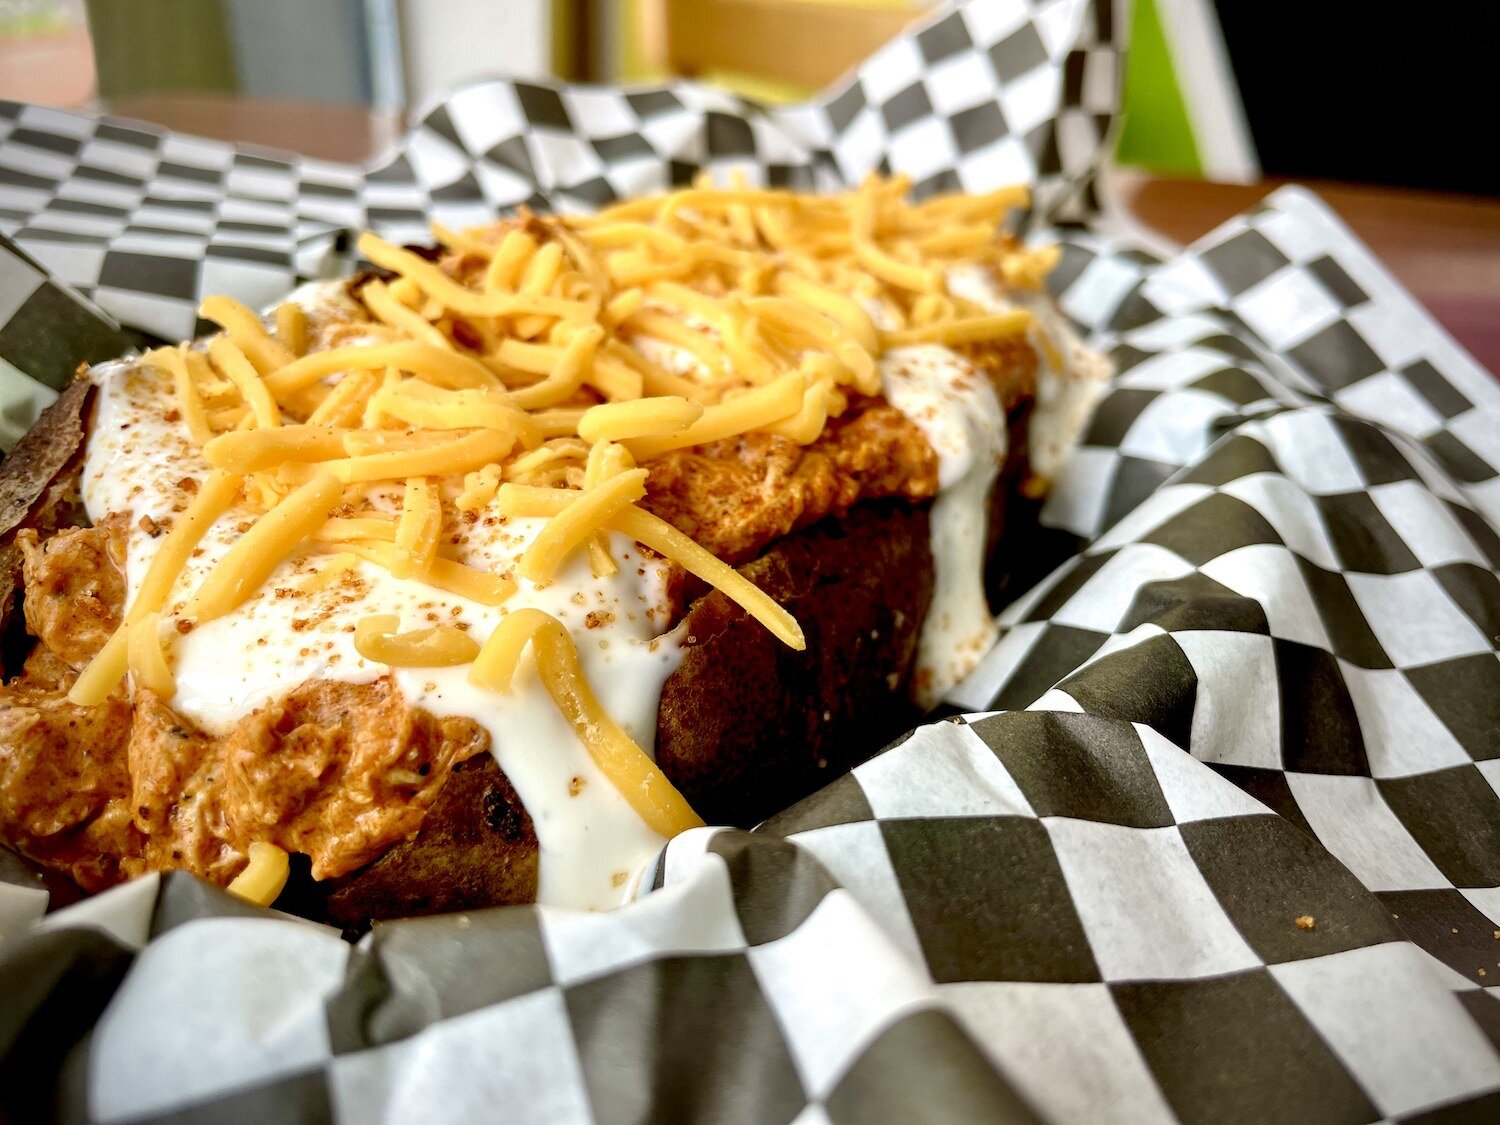 A loaded baked potato restaurant, The Half Baked Potato, is coming ...